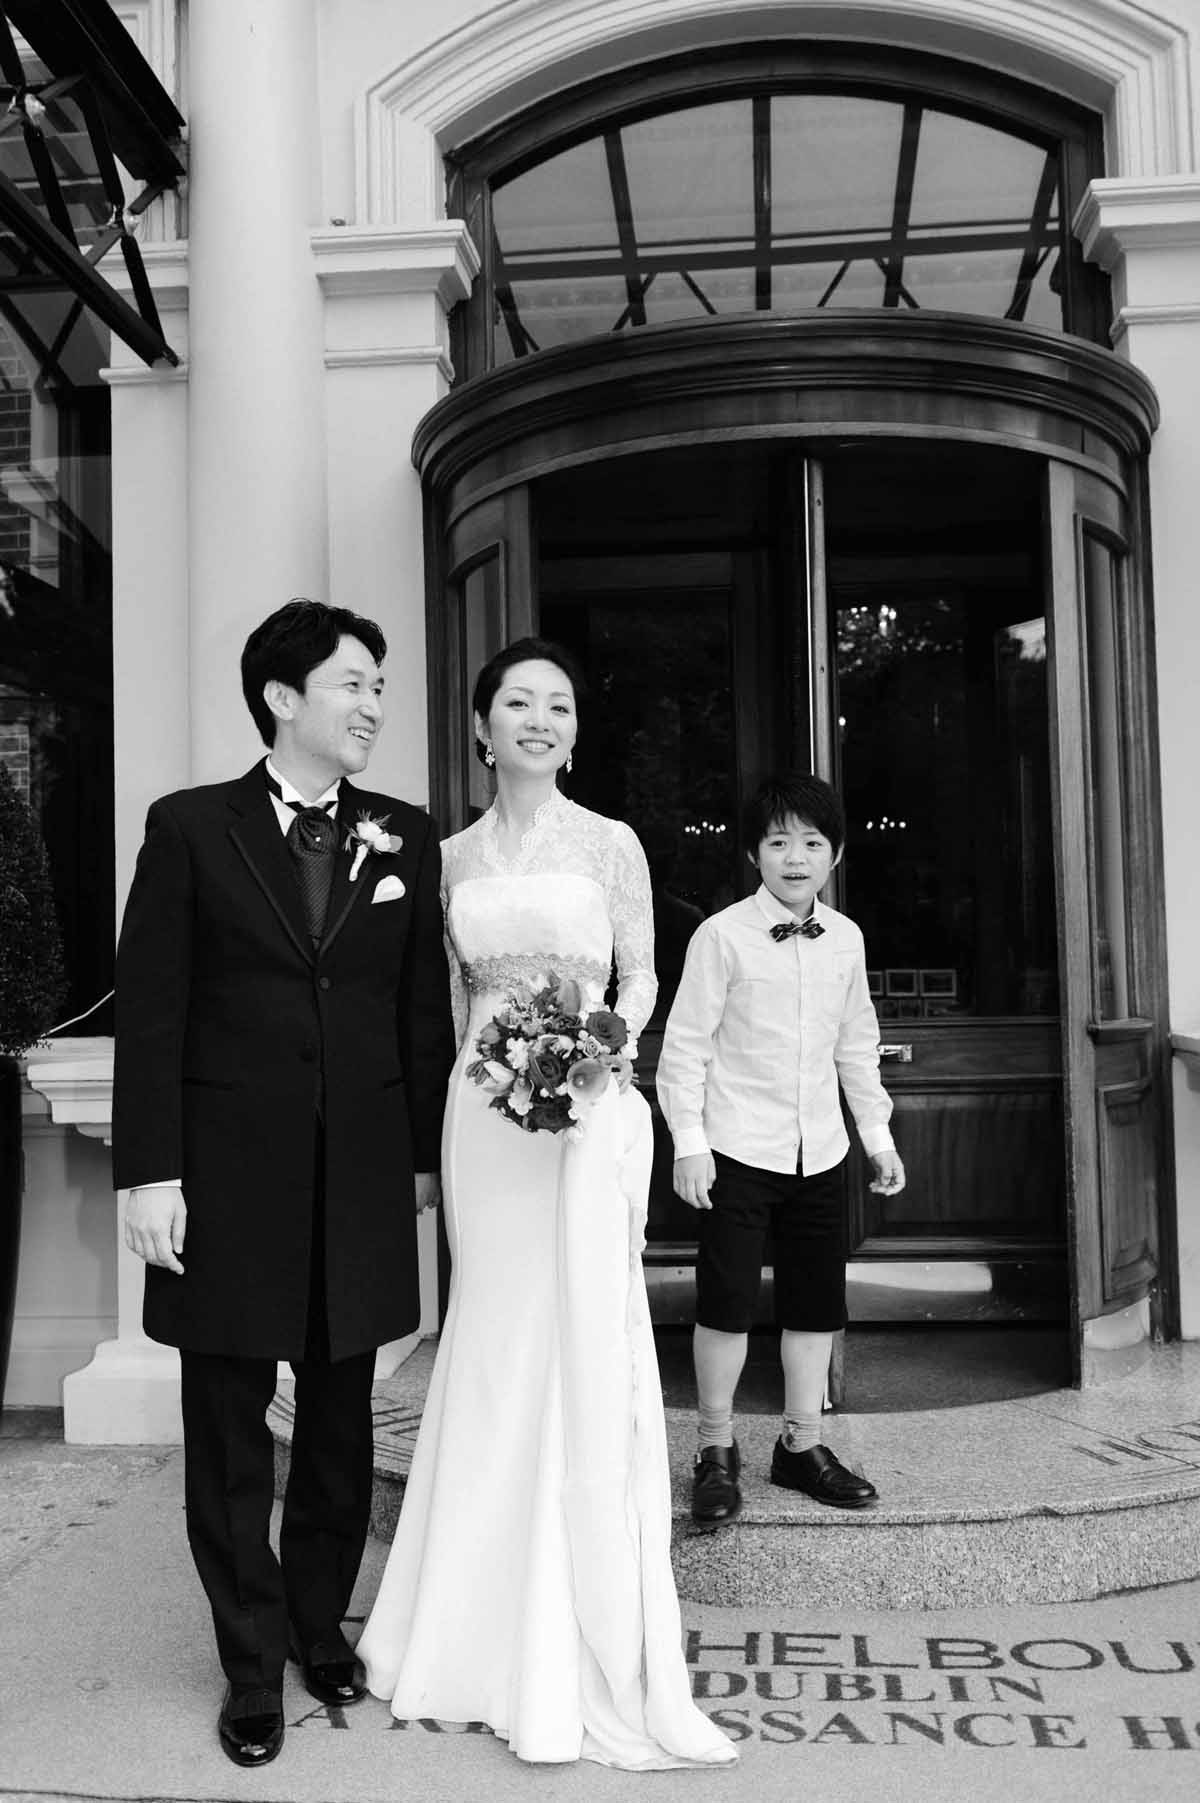 Wedding Photograph at The Shelbourne Hotel